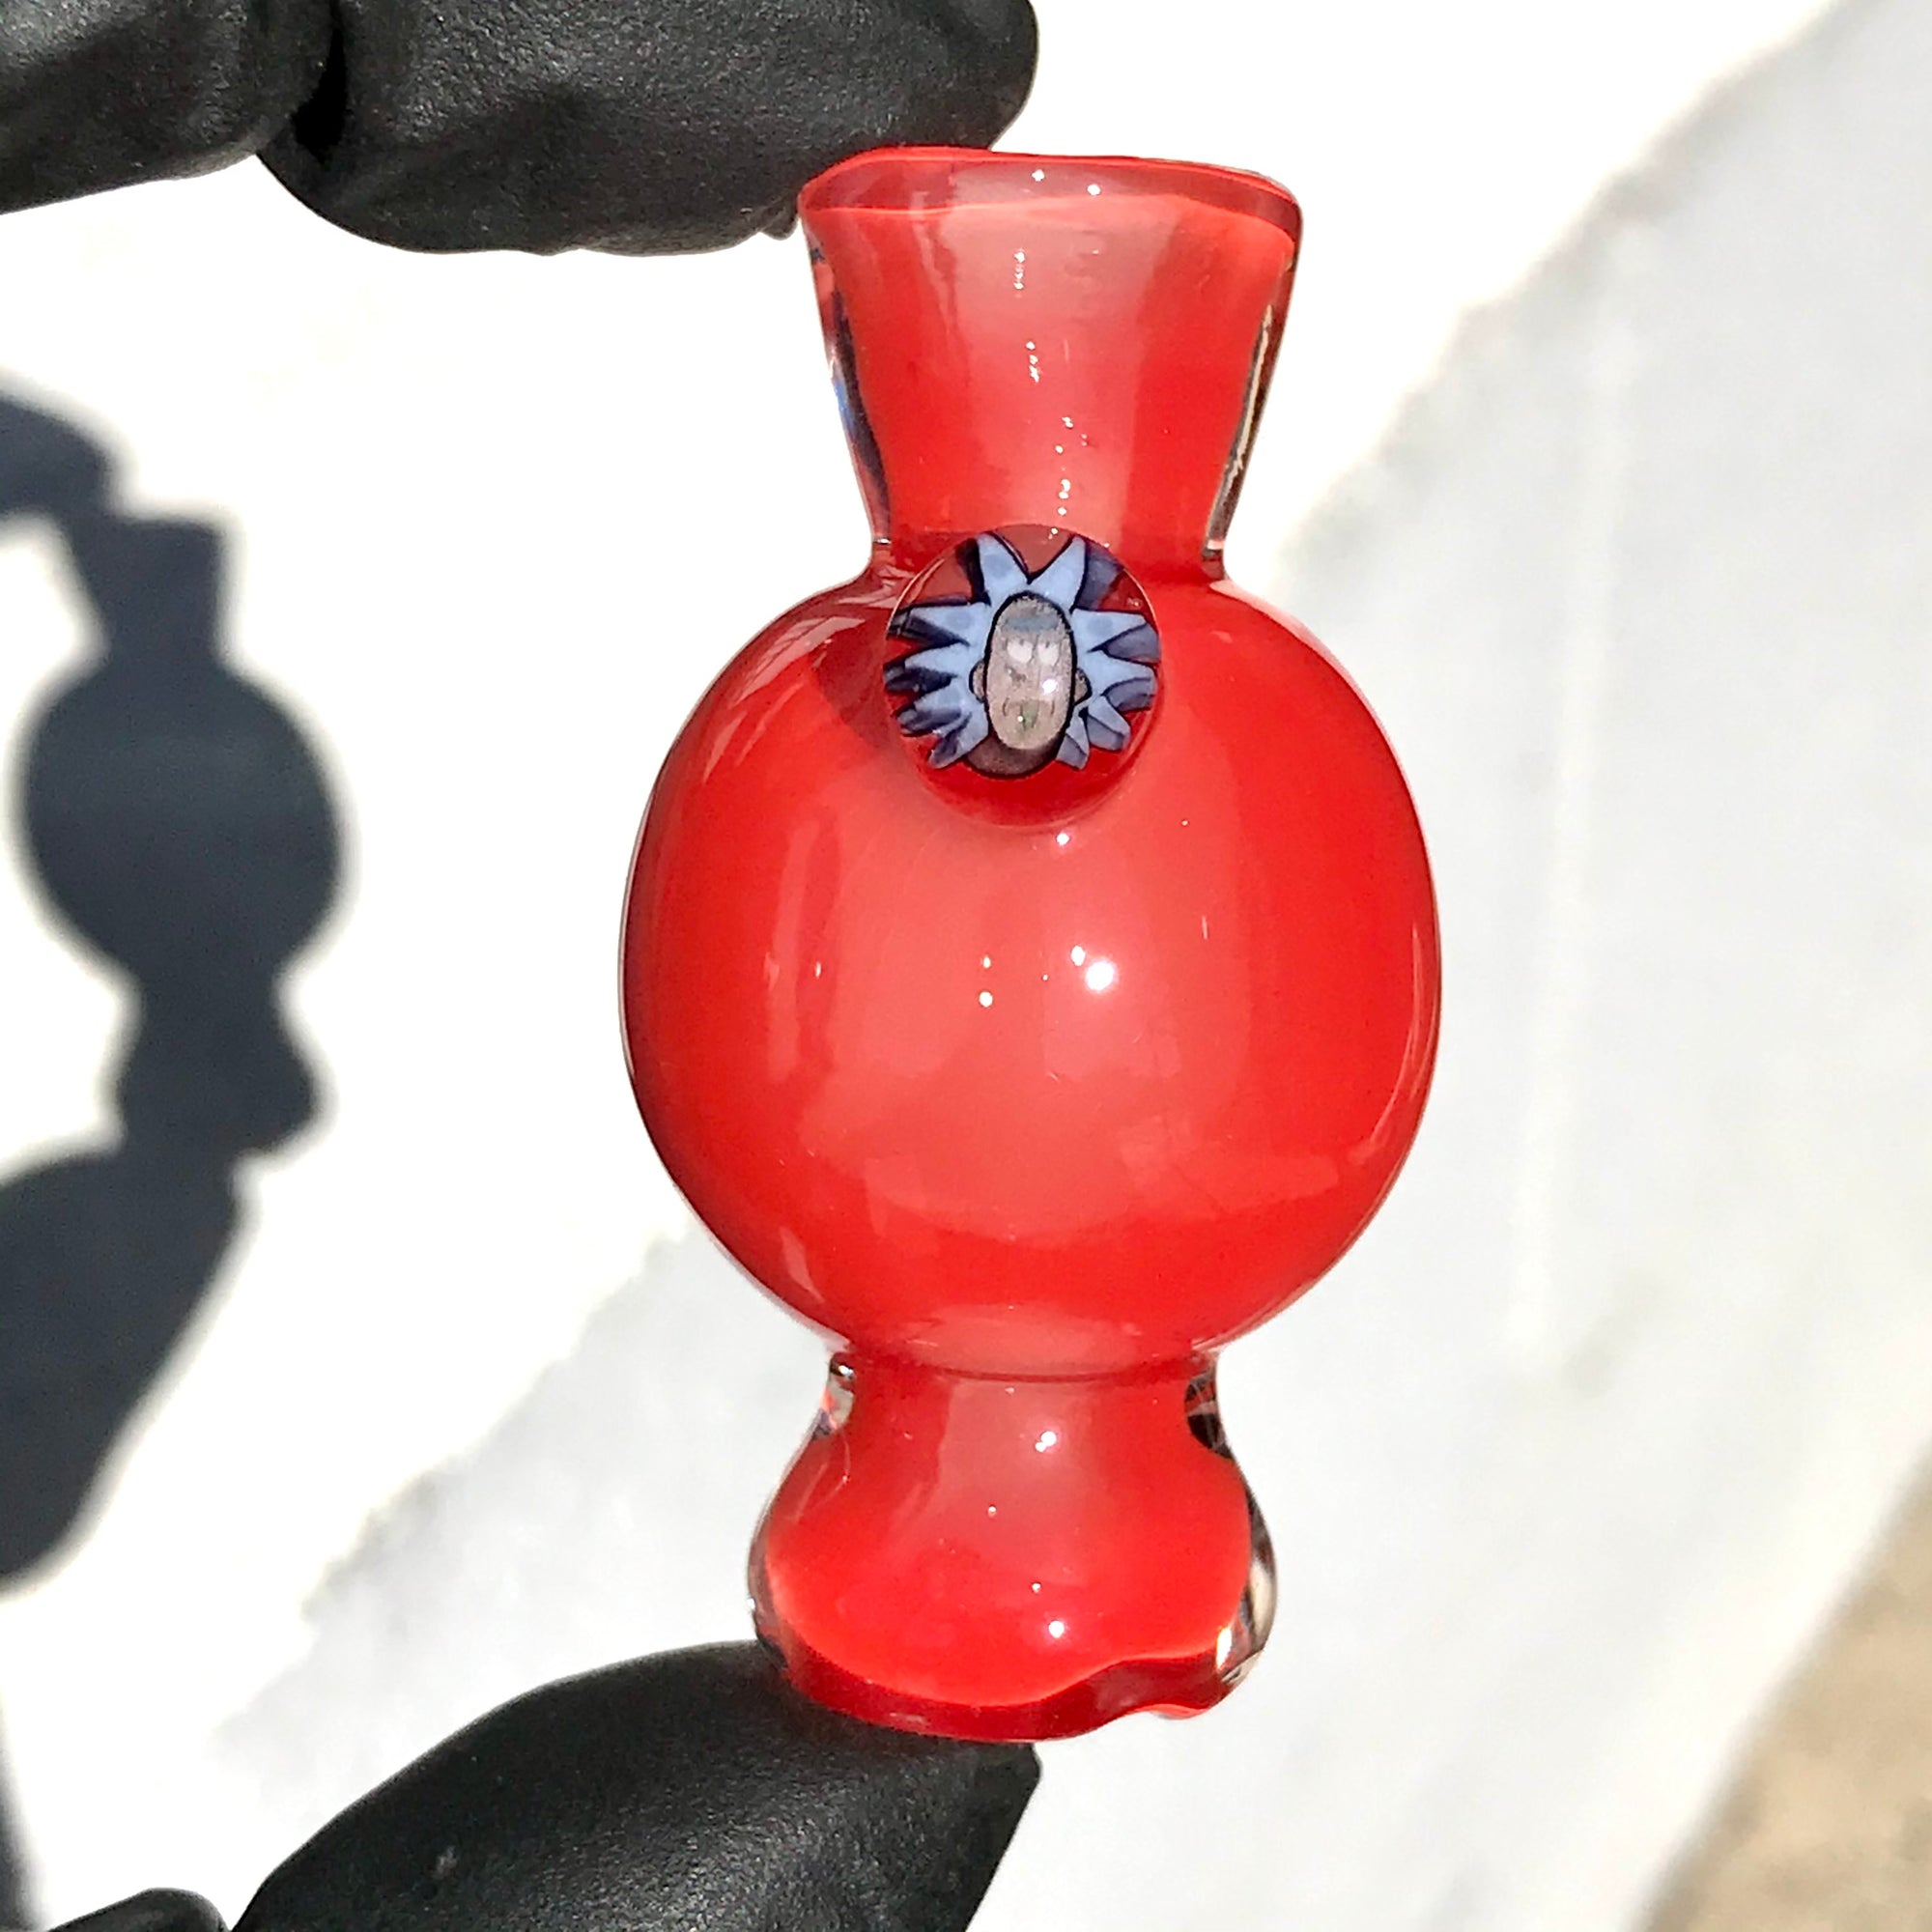 Hoyer Glass Spinner Cap with Milli Image and Matching Milli Terp Pearl (Hot Sauce) show variant 